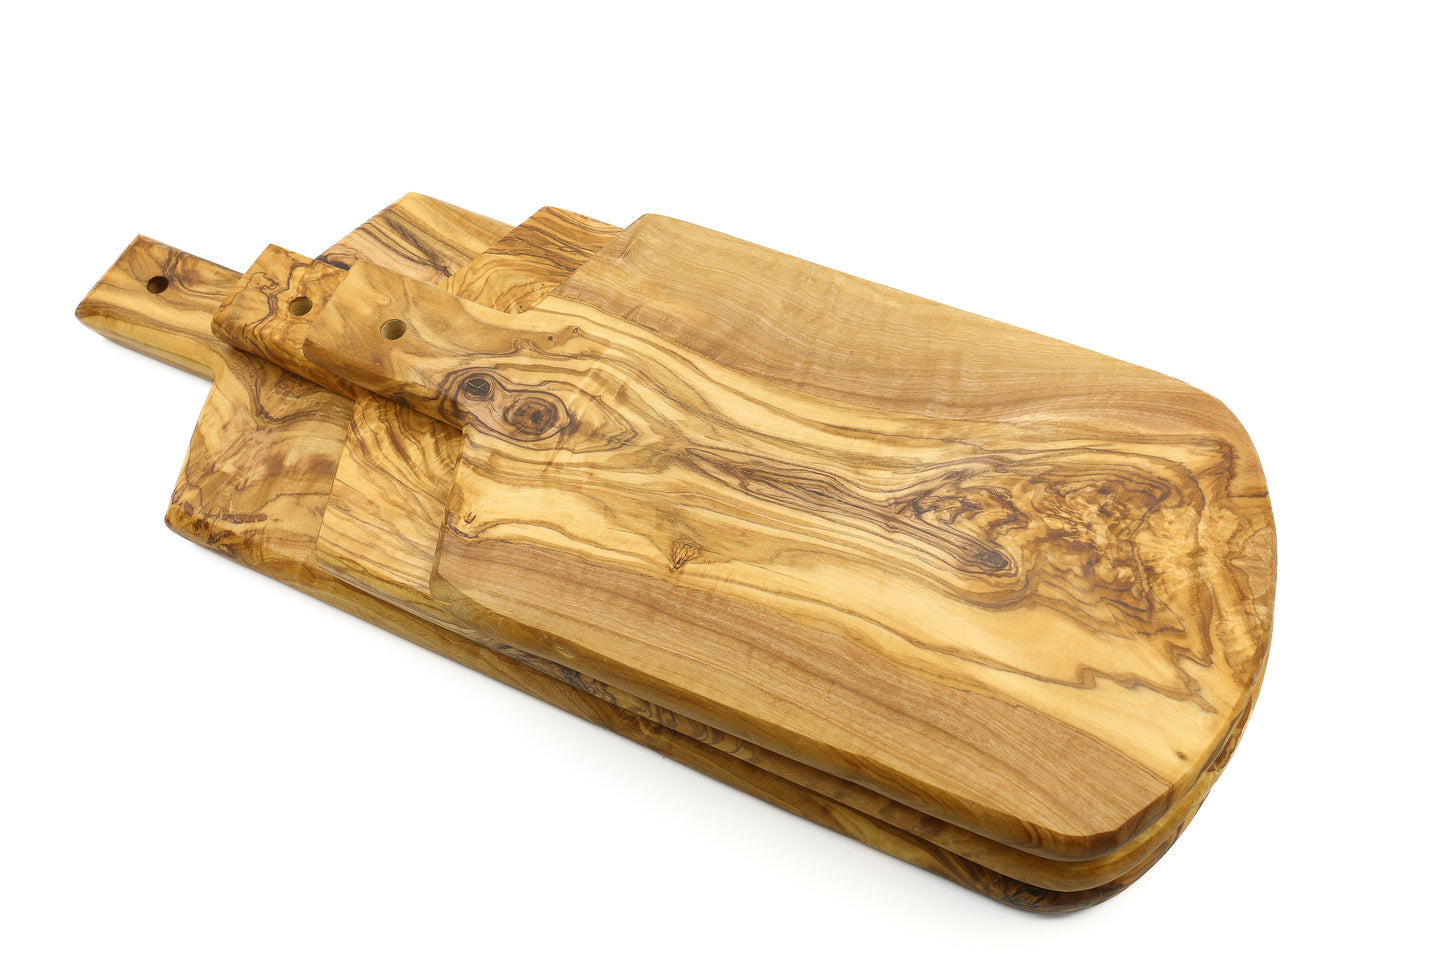 Serving board made of olive wood in a shield shape with a handle